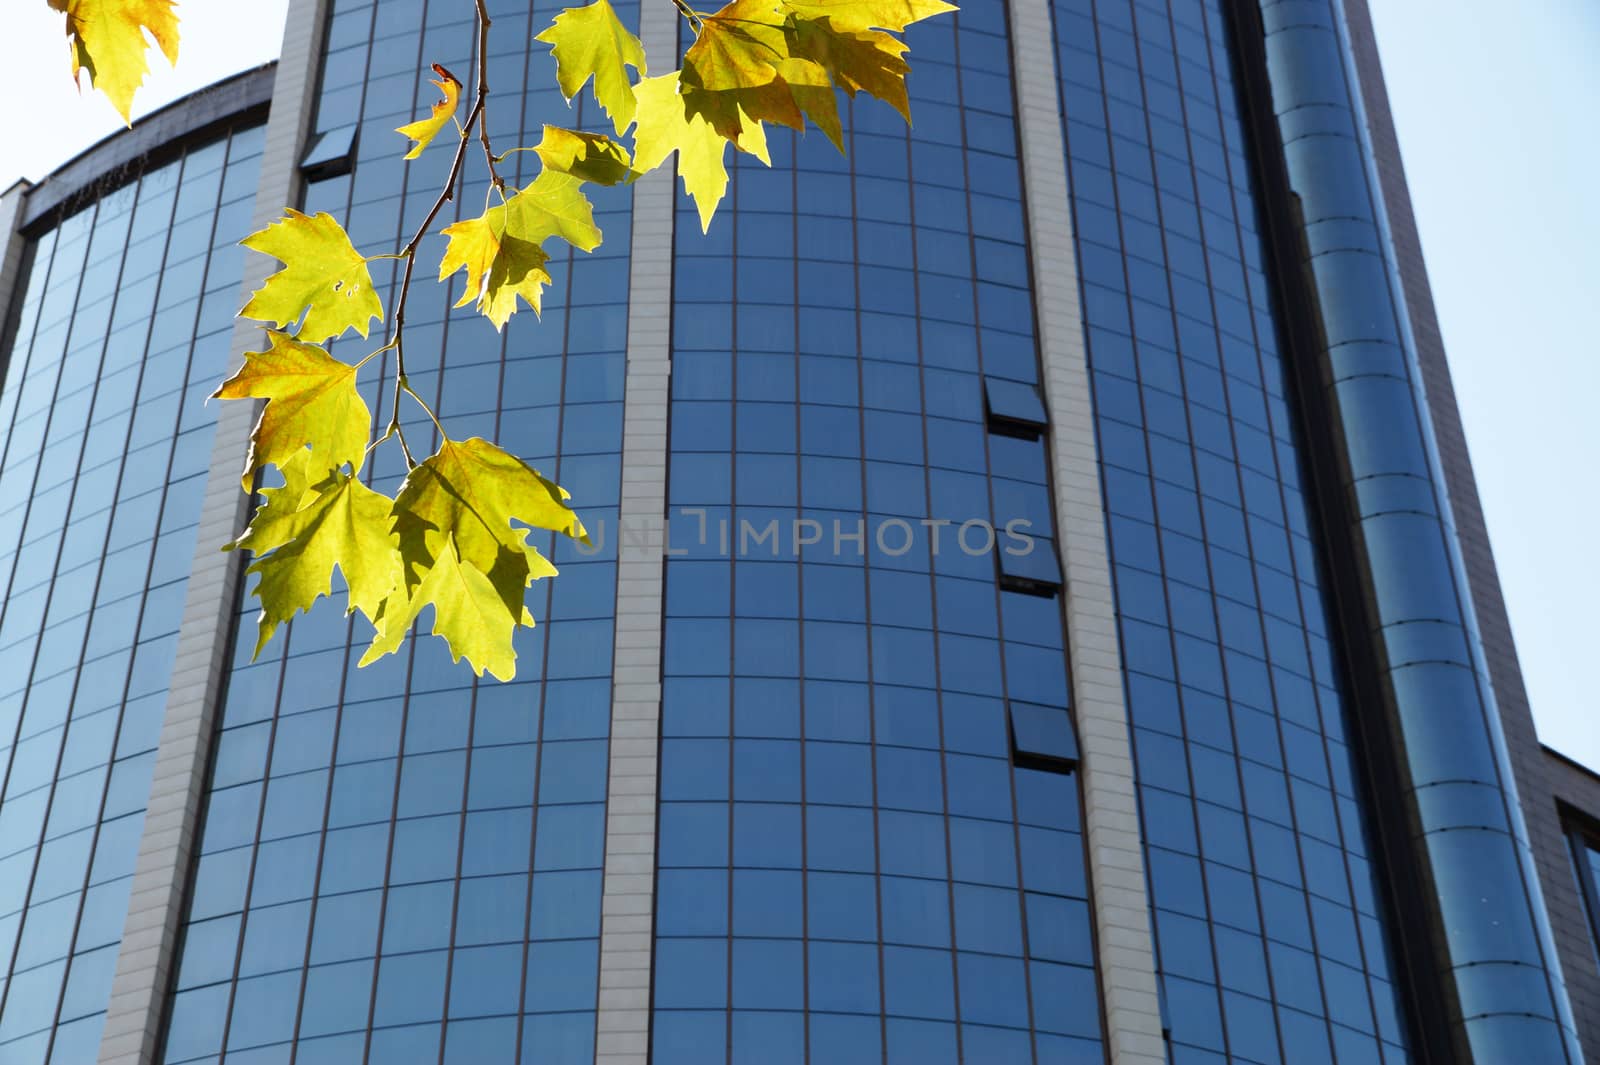 modern glass facade of a skyscraper against the sky, a maple branch in the foreground in the sun